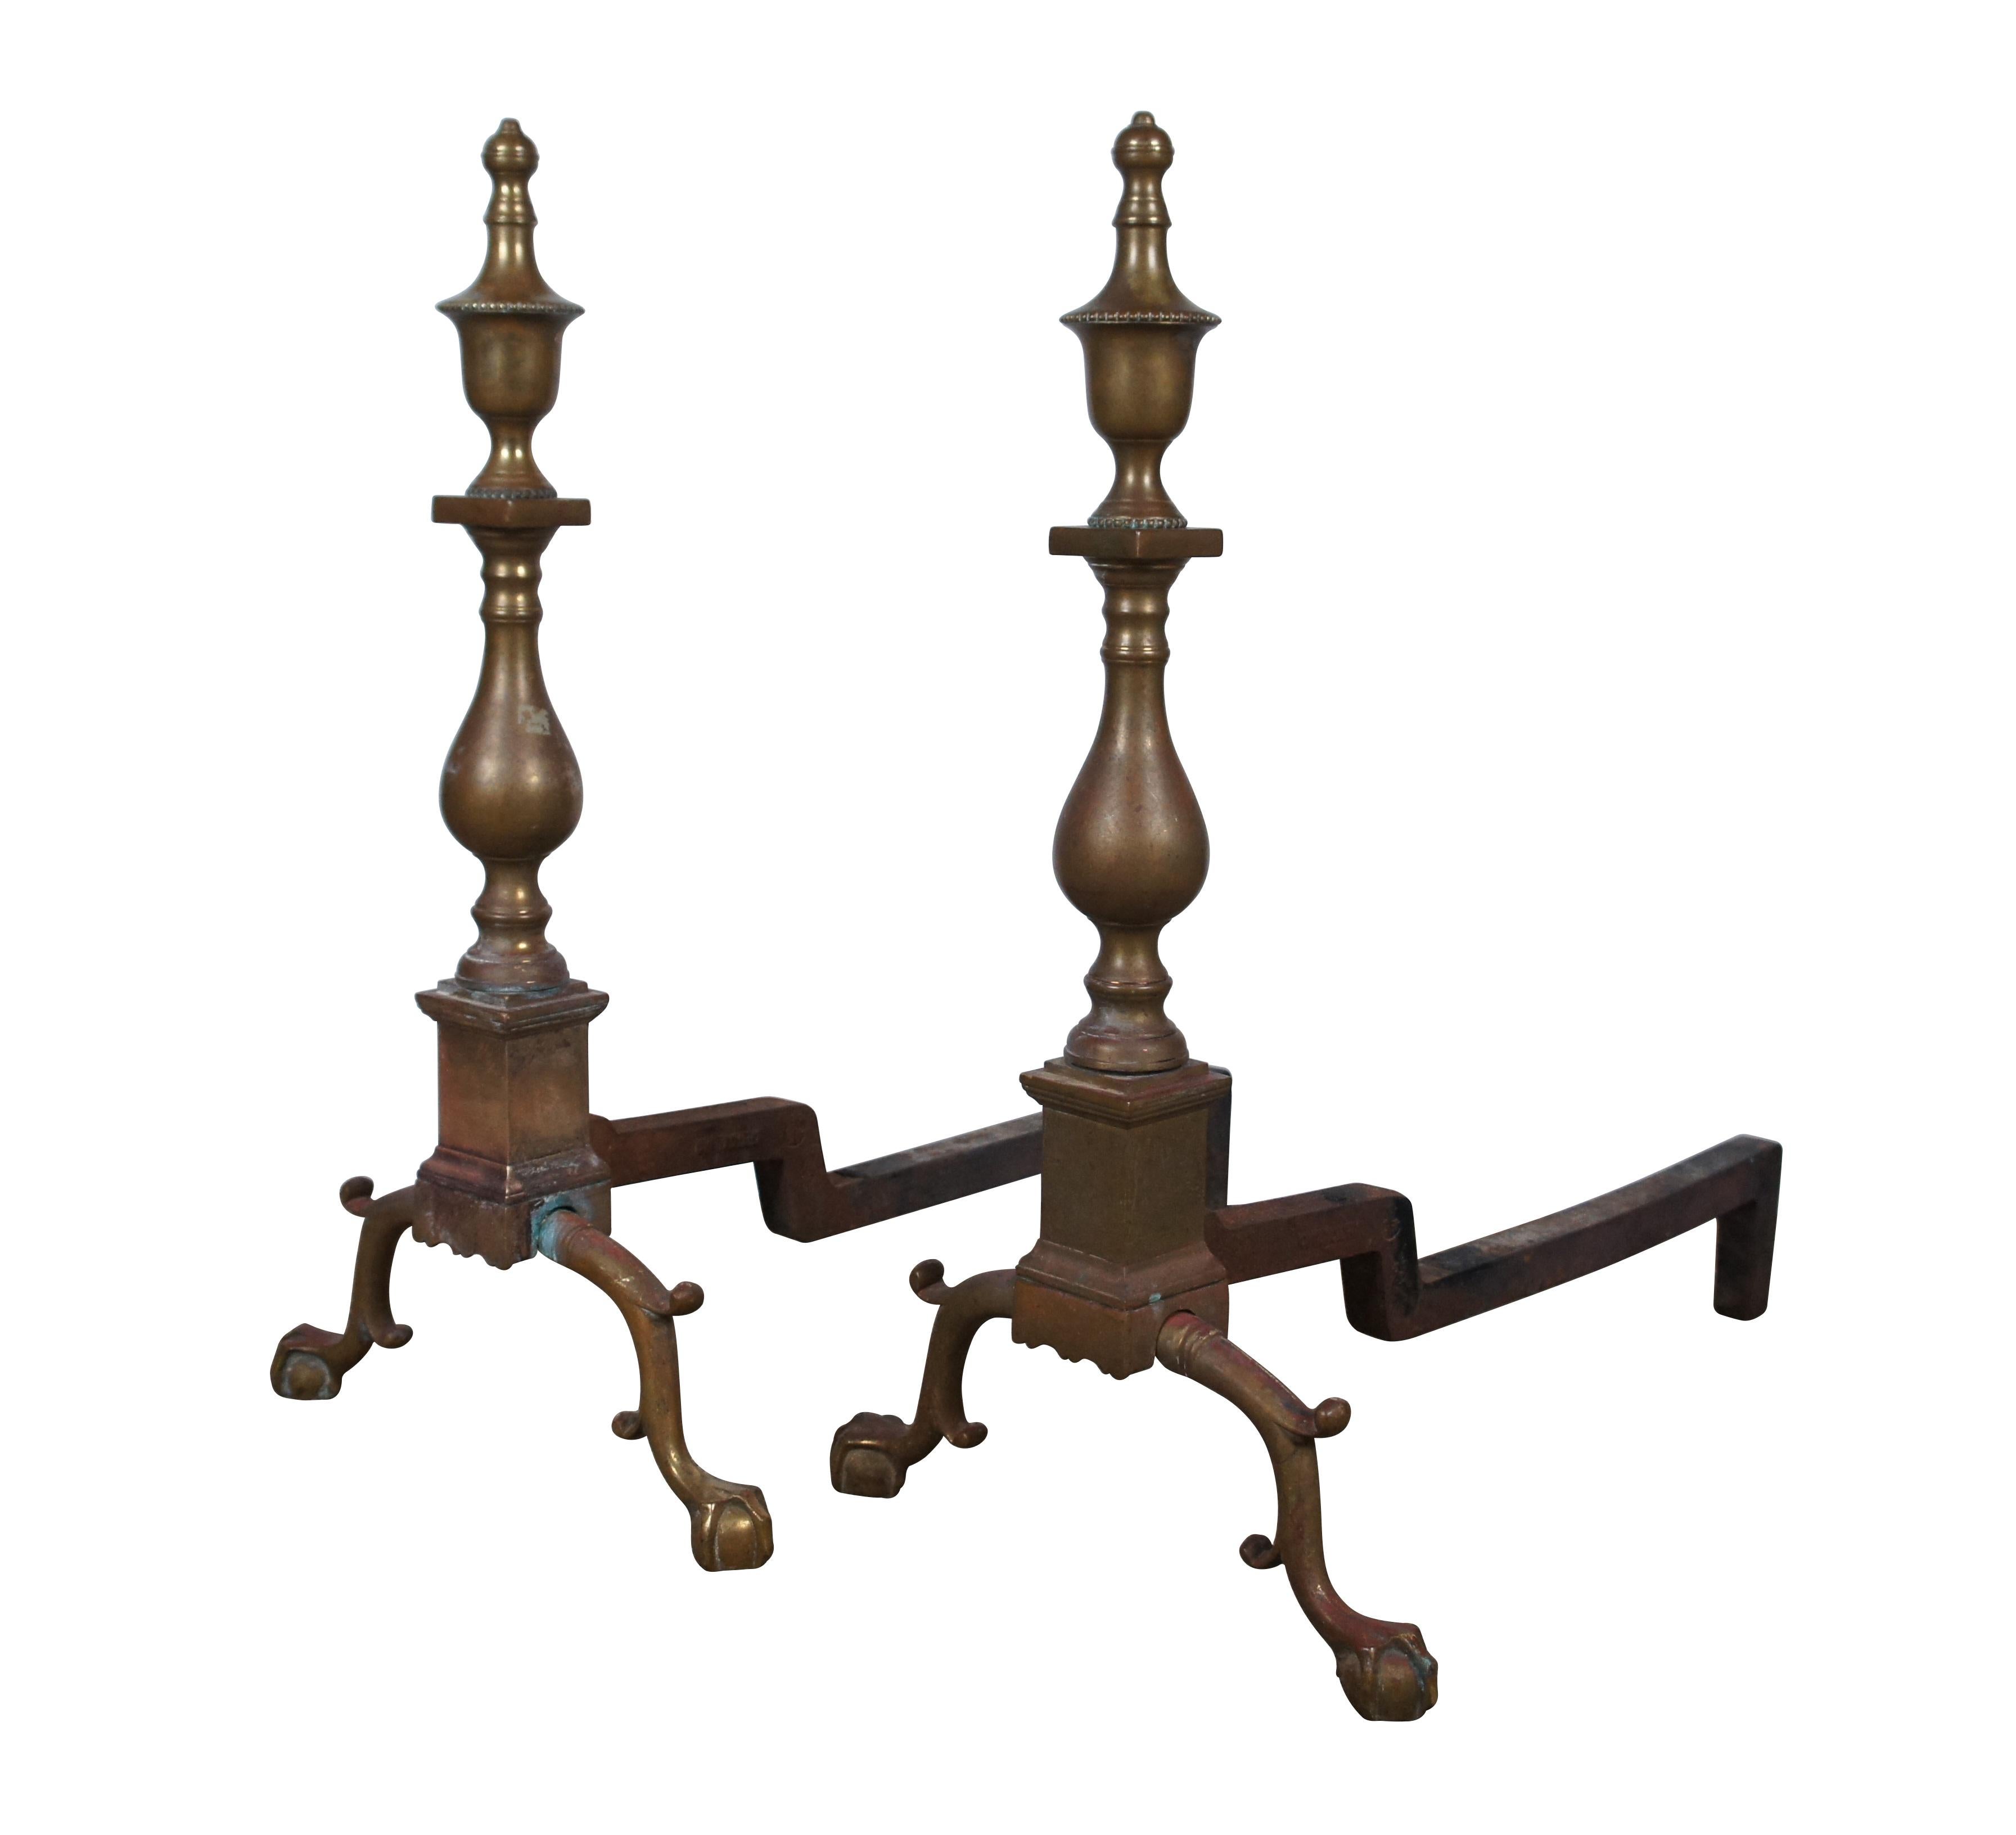 Mid Century iron and brass andirons / firedogs by Harvin / Virginia Metalcrafters for the Colonial Williamsburg Restoration line of products. Features colonial styling with scrolled ball and claw feet and baluster shape with trophy urn tops. Item